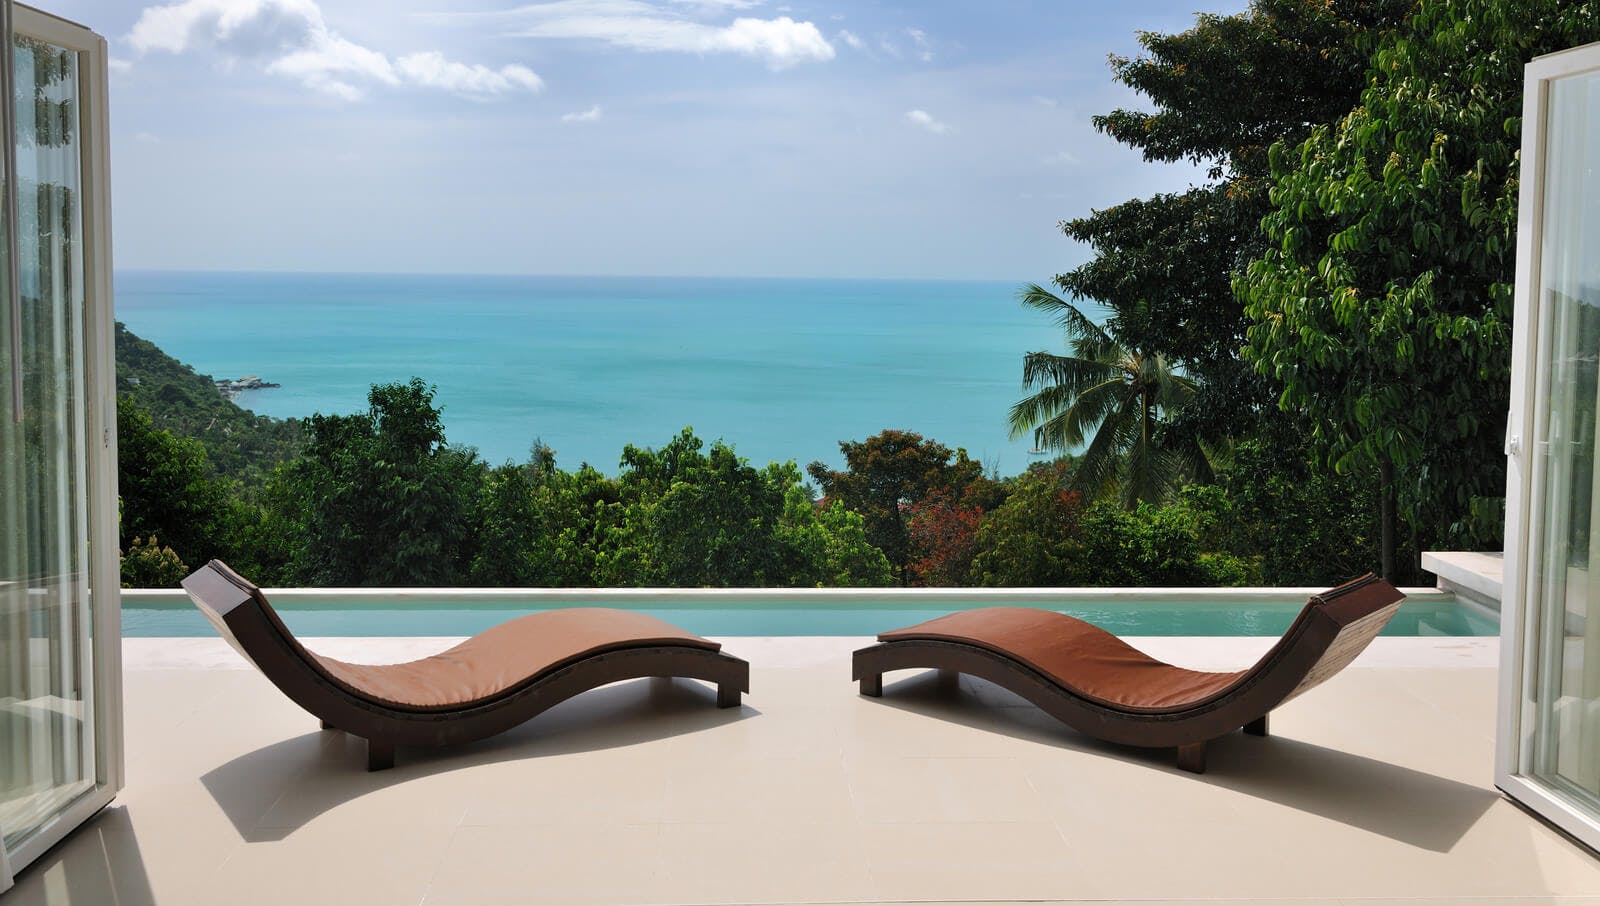 two brown sun lungers on a patio by a private pool overlooking trees and the sea